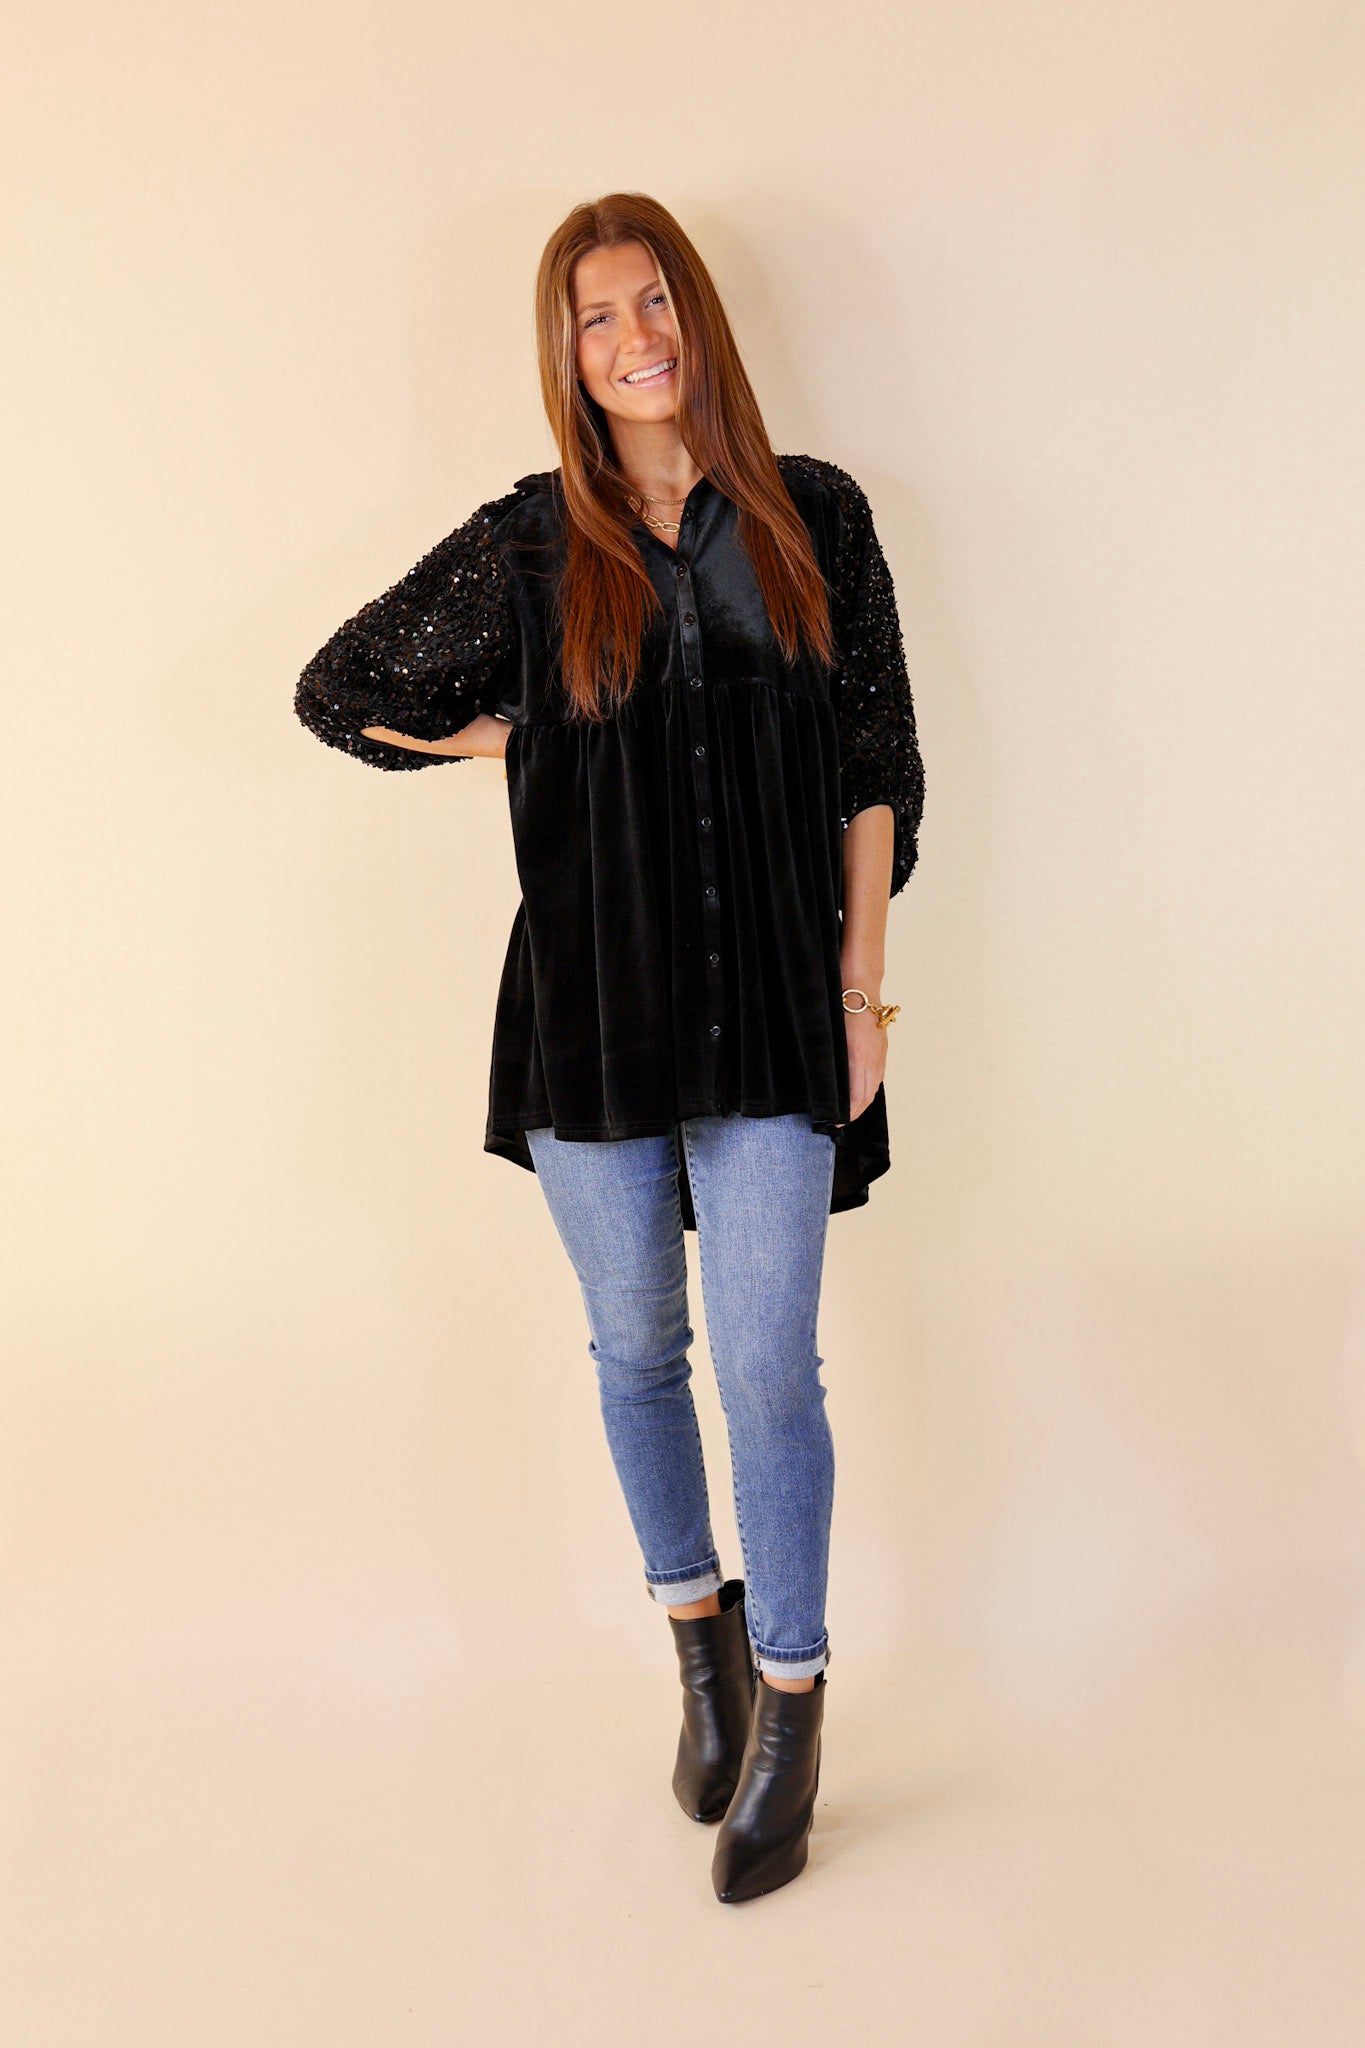 Love Link Button Up Velvet and Sequin Half Sleeve Babydoll Tunic Top in Black - Giddy Up Glamour Boutique